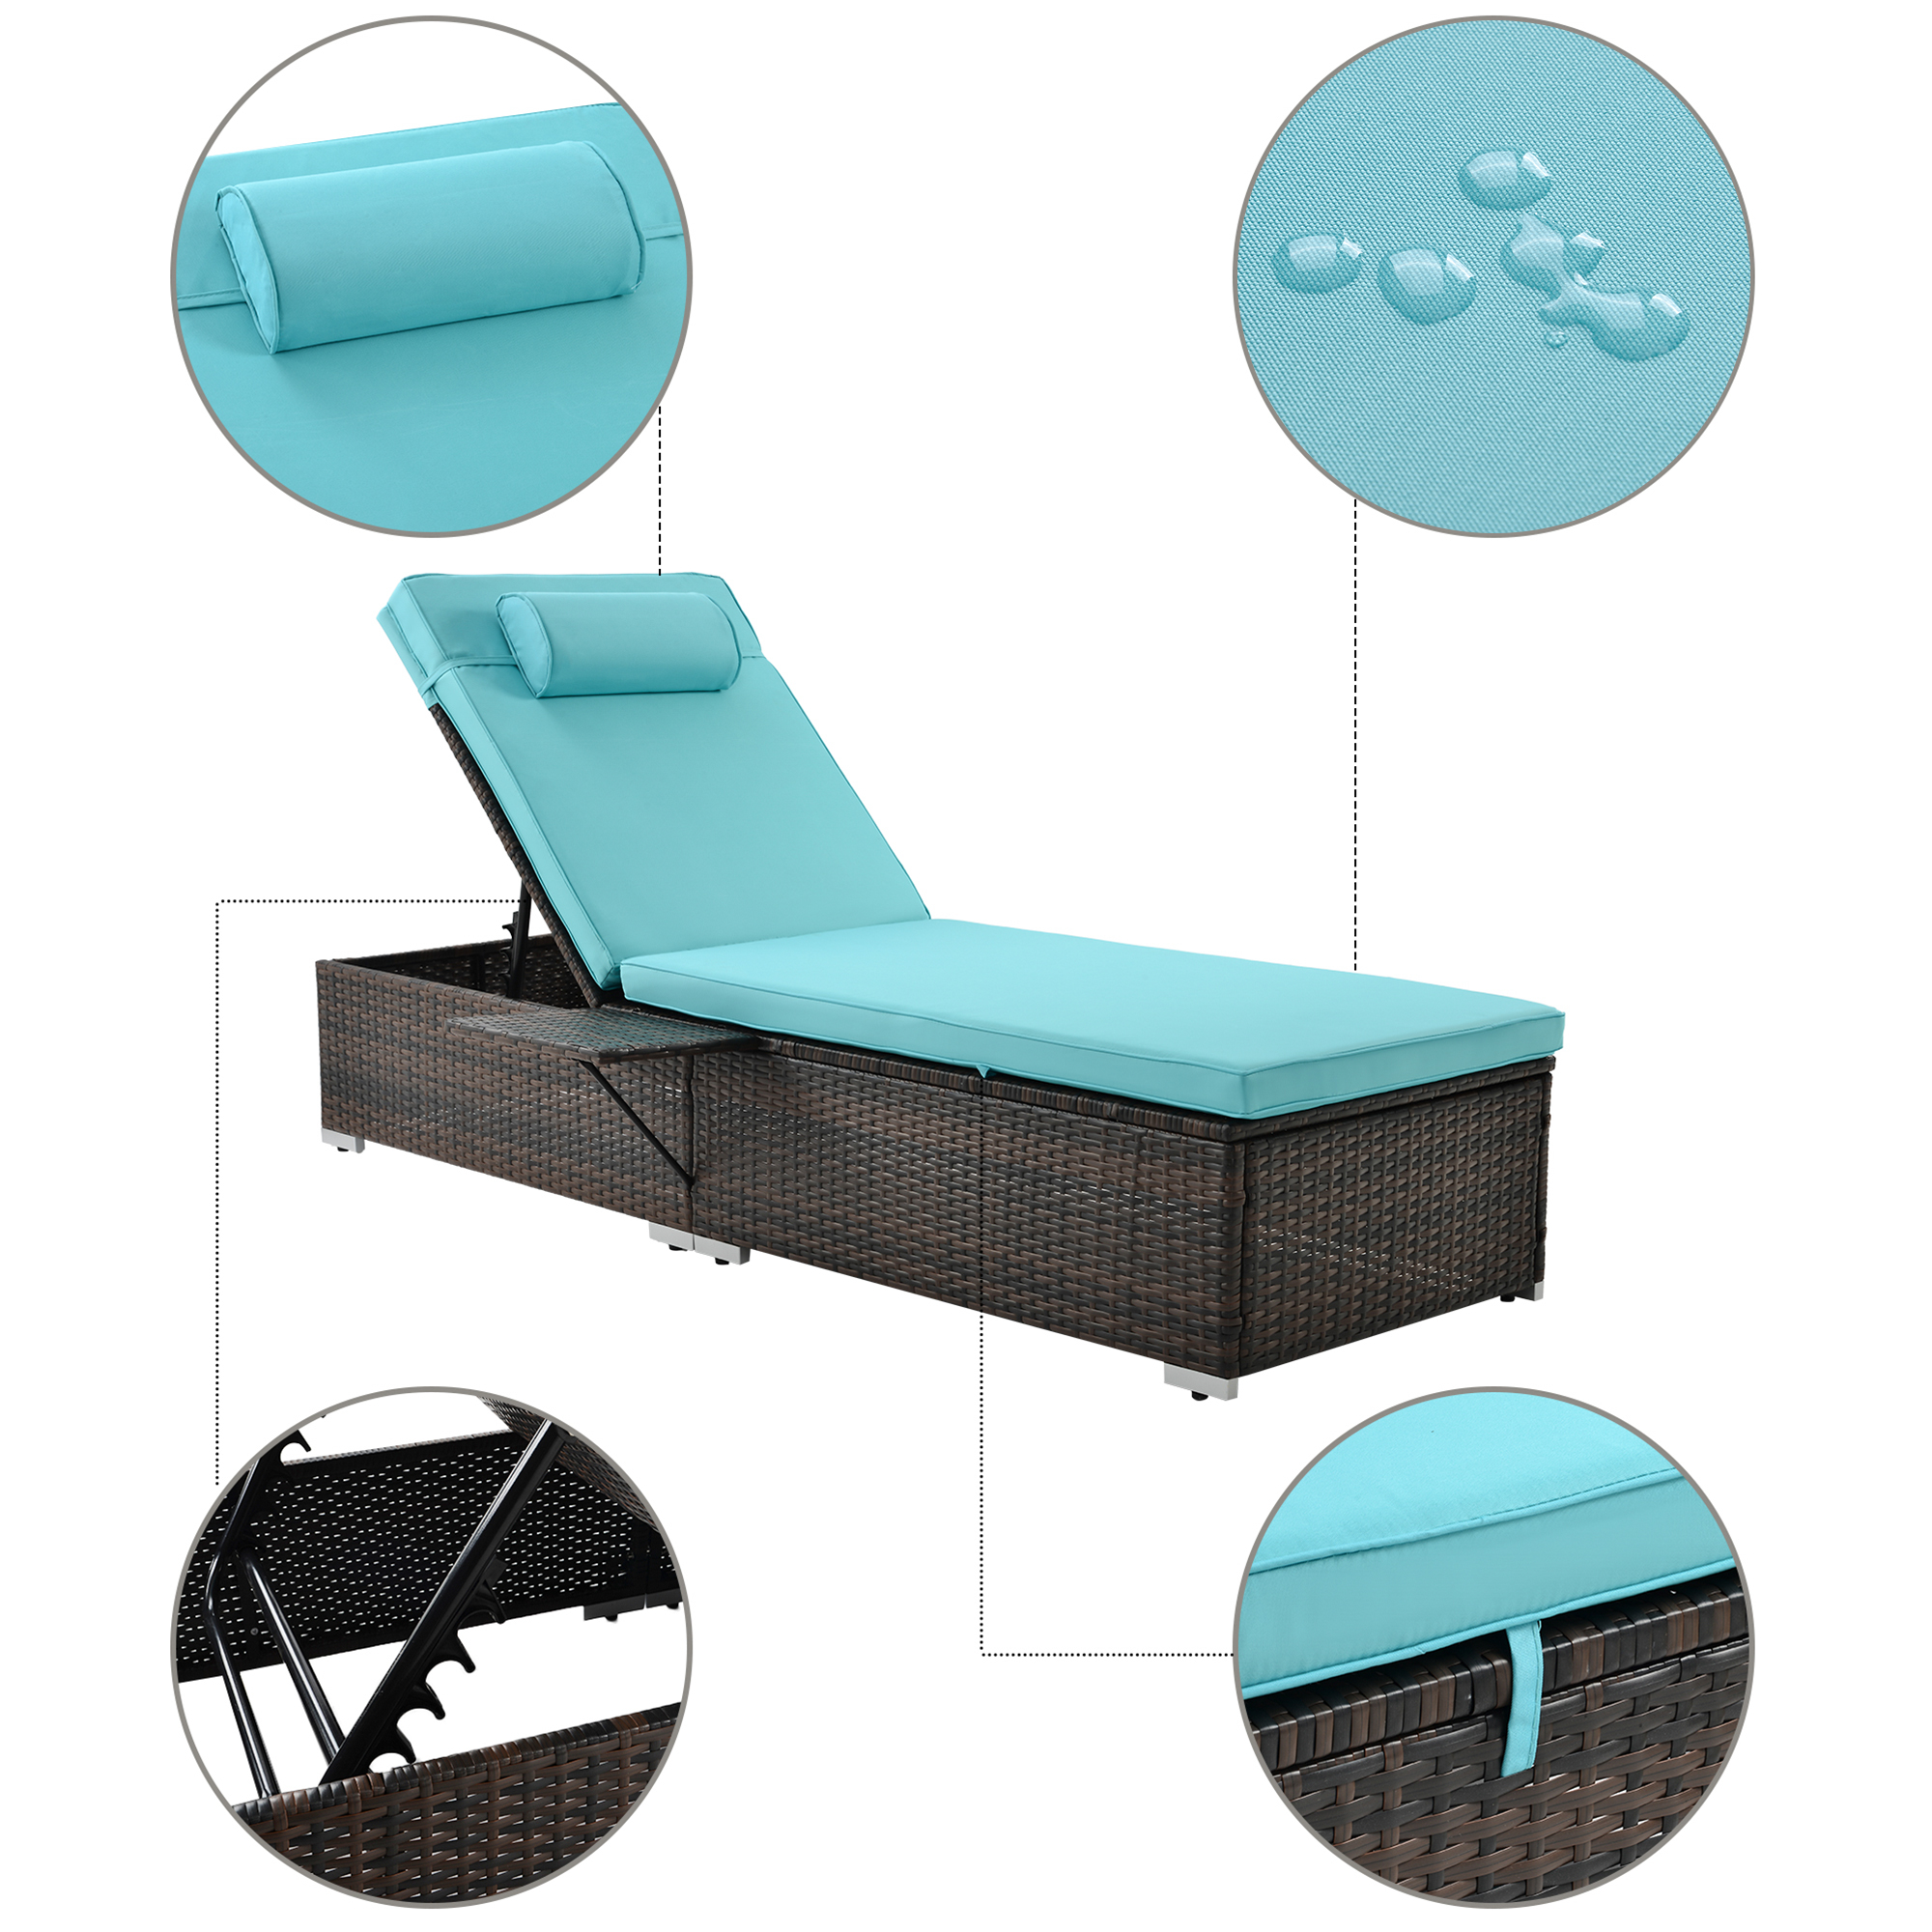 2 Pieces Patio Chaise Lounge Chair Set, PE Rattan Chaise Lounge with Side Table, Sun Chaise Lounge Furniture, Pool Furniture Sunbed with Cushion, Tanning Lounge Chair with 5 Adjustable Positions, B381 - image 5 of 8